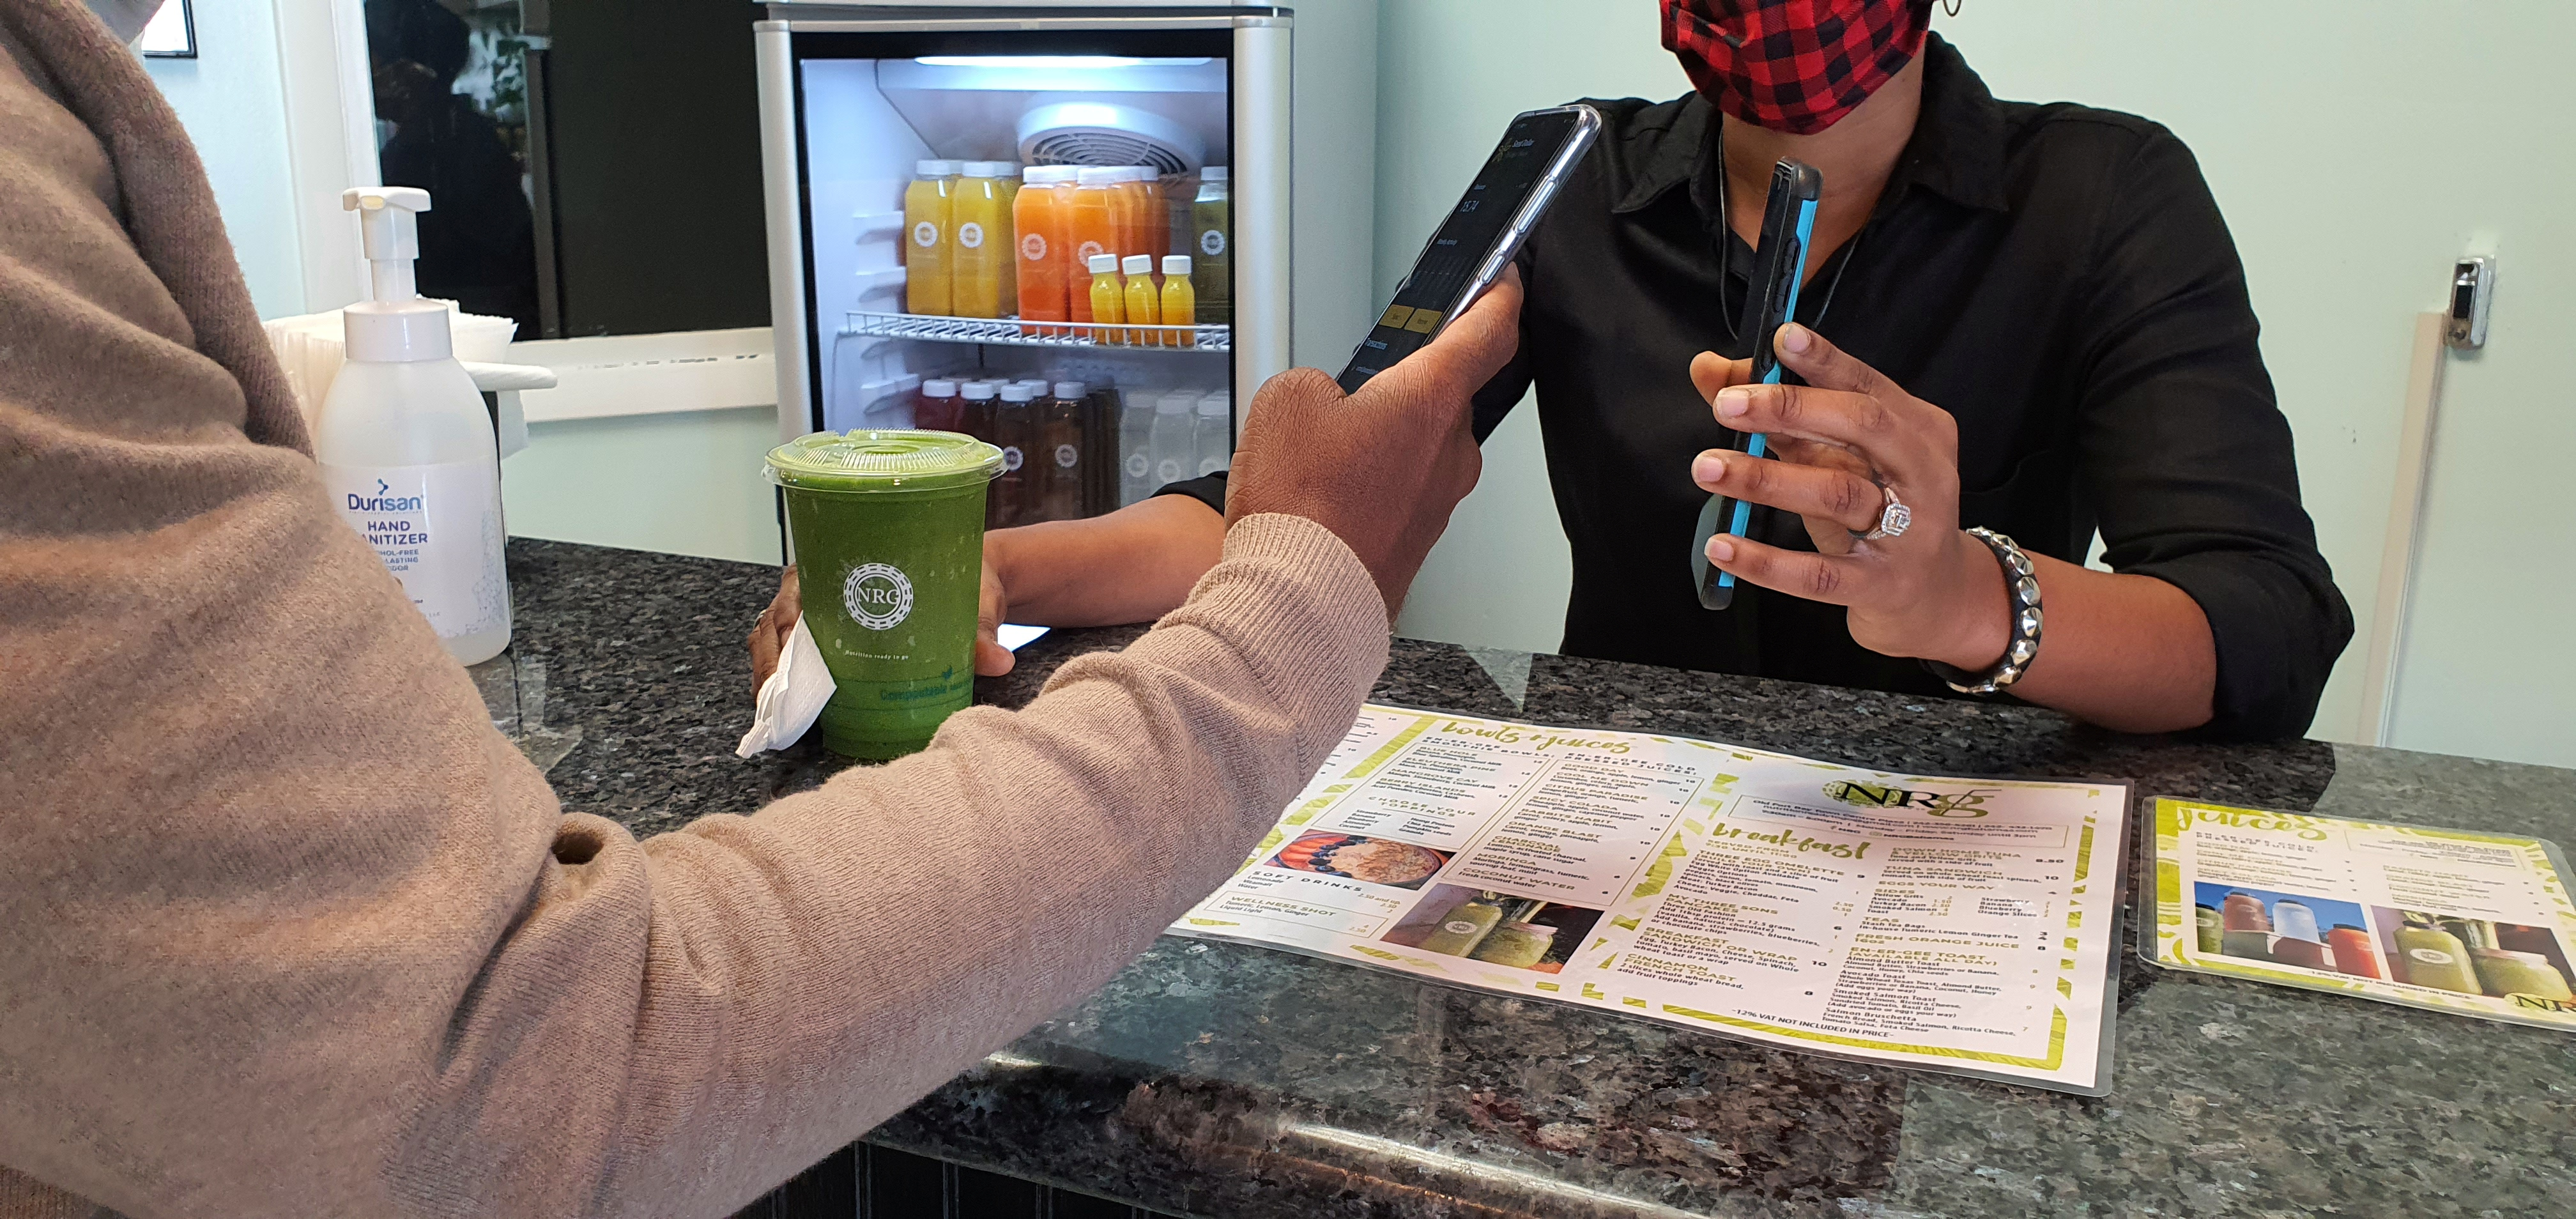 Dawn Sands, owner of NRG cafe, takes payment from a customer with central bank digital currency in Nassau, the Bahamas in November 2020 in this handout image obtained by Reuters on December 17, 2020. Central Bank of The Bahamas (CBoB)/Handout via REUTERS